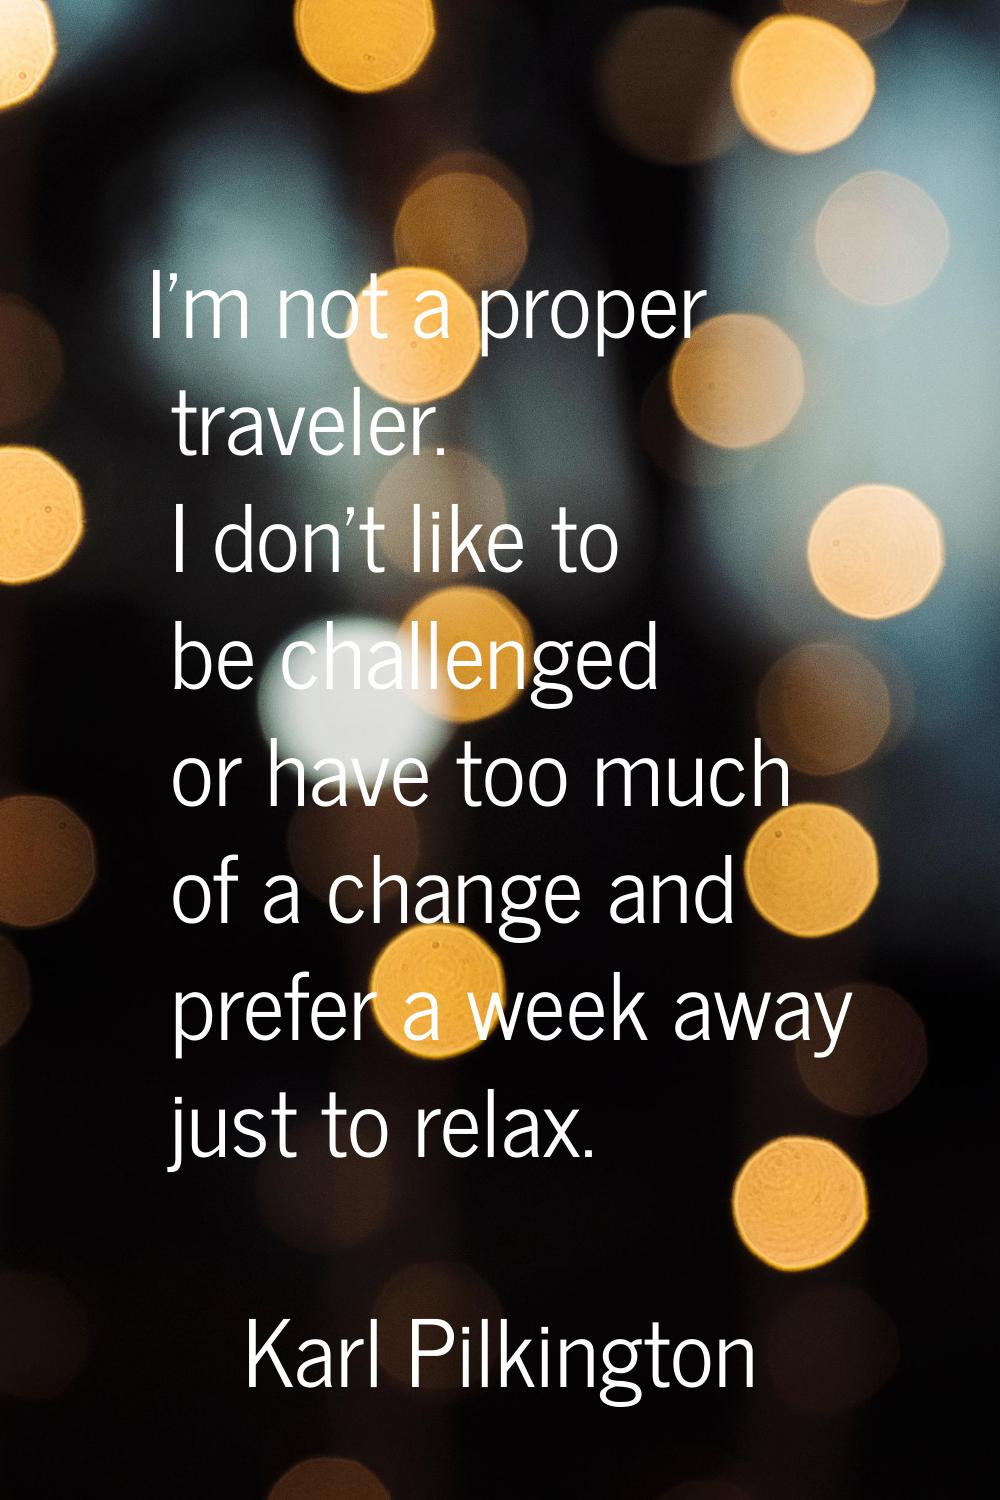 I'm not a proper traveler. I don't like to be challenged or have too much of a change and prefer a 